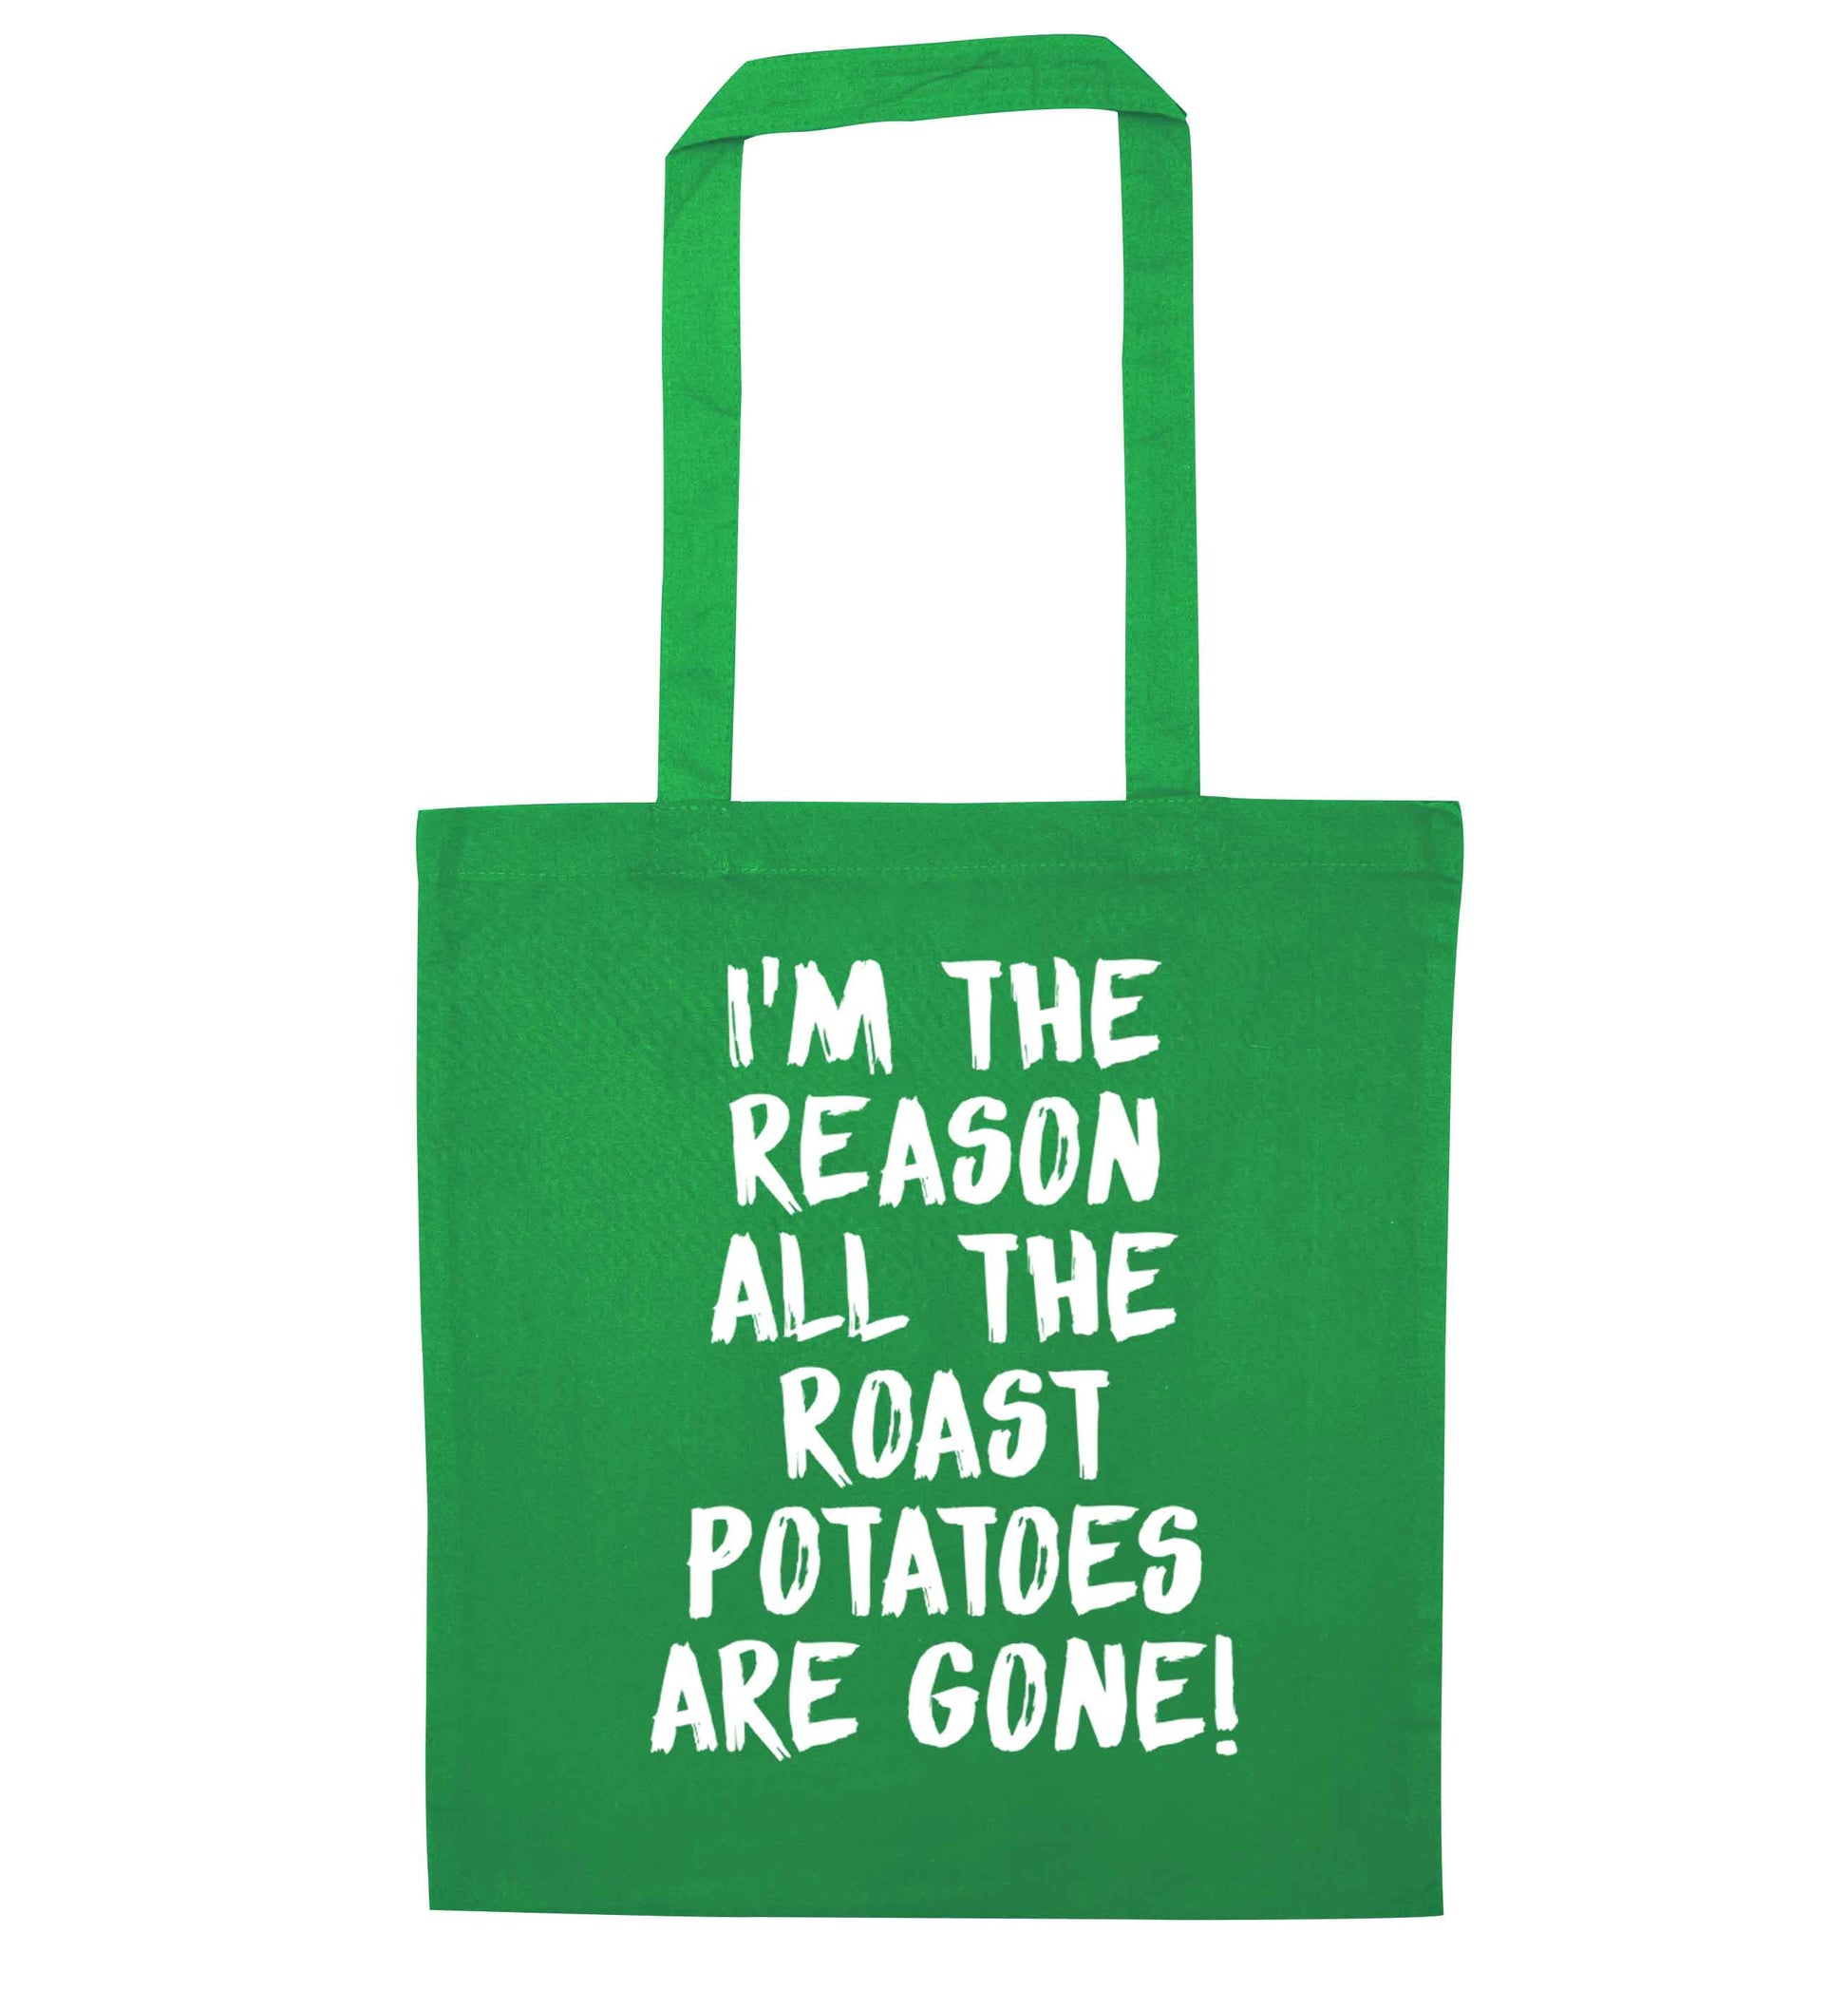 I'm the reason all the roast potatoes are gone green tote bag